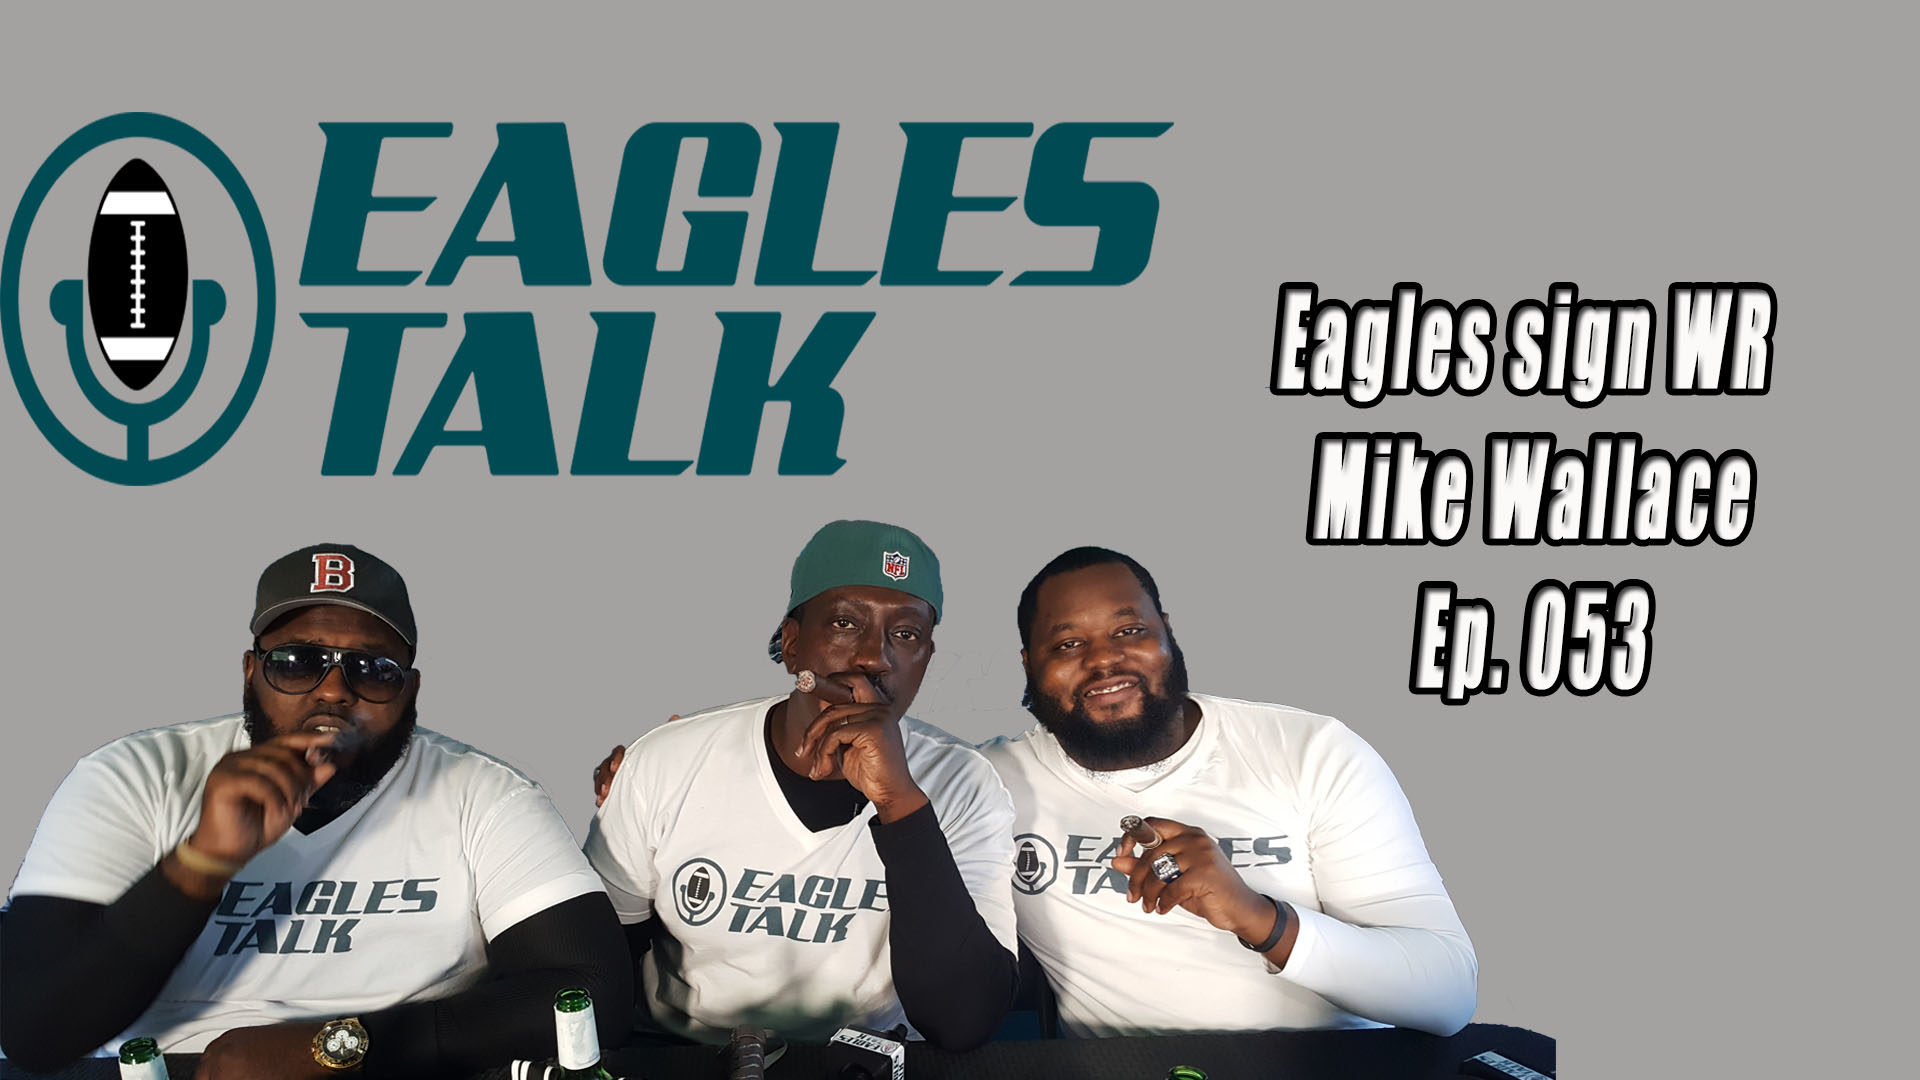 Eagles Talk Ep053: Eagles sign WR Mike Wallace/DE Michael Bennett indicted